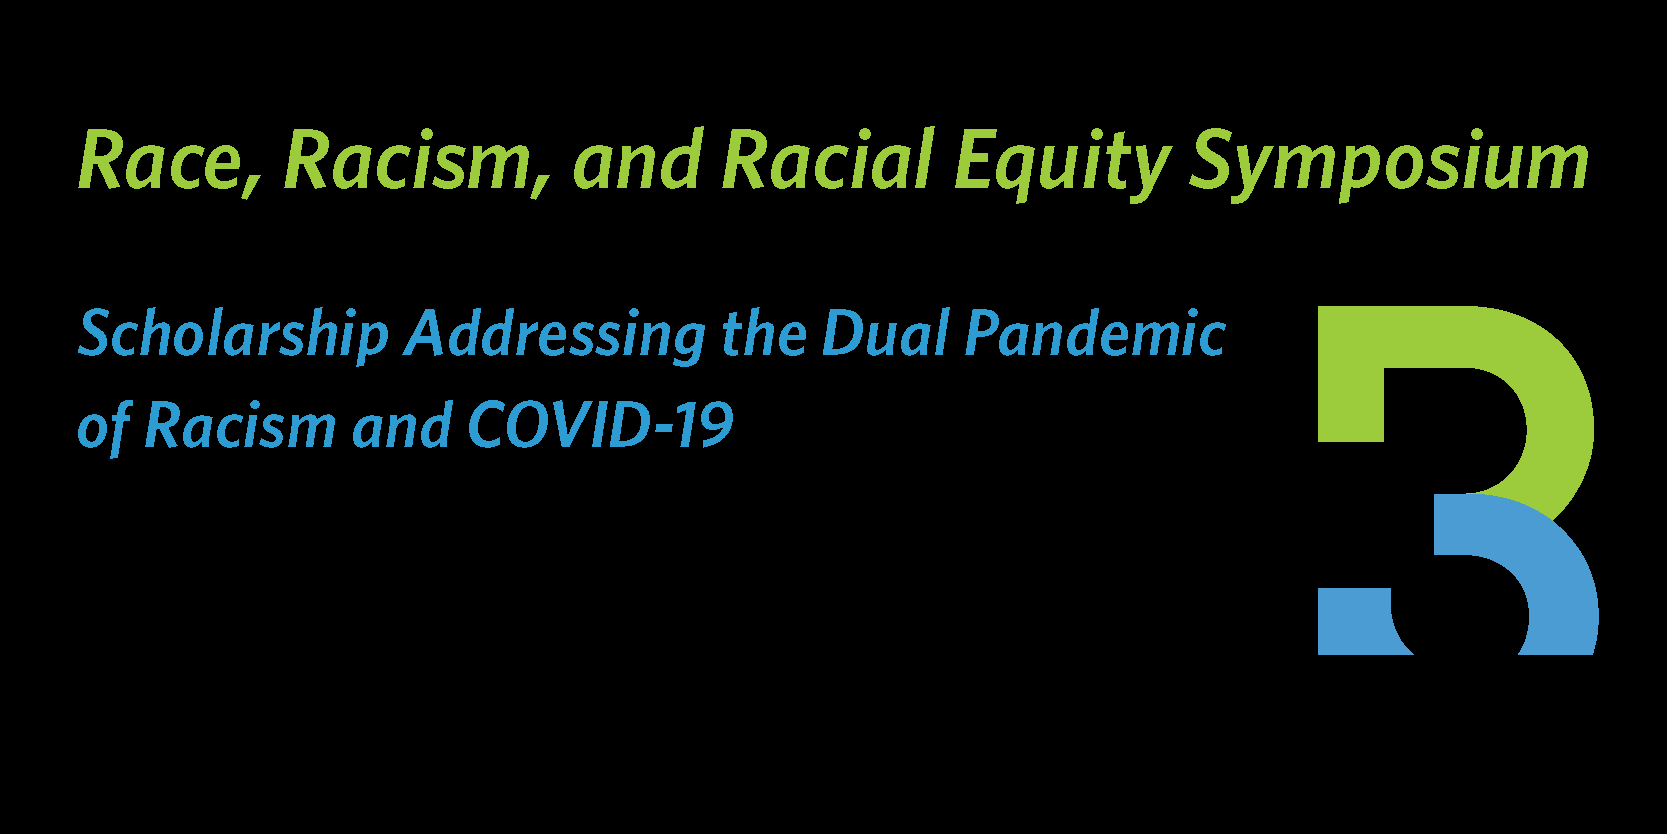 Race, Racism, and Racial Equity Symposium. Scholarship Addressing the Dual Pandemic of Racism and COVID-19.